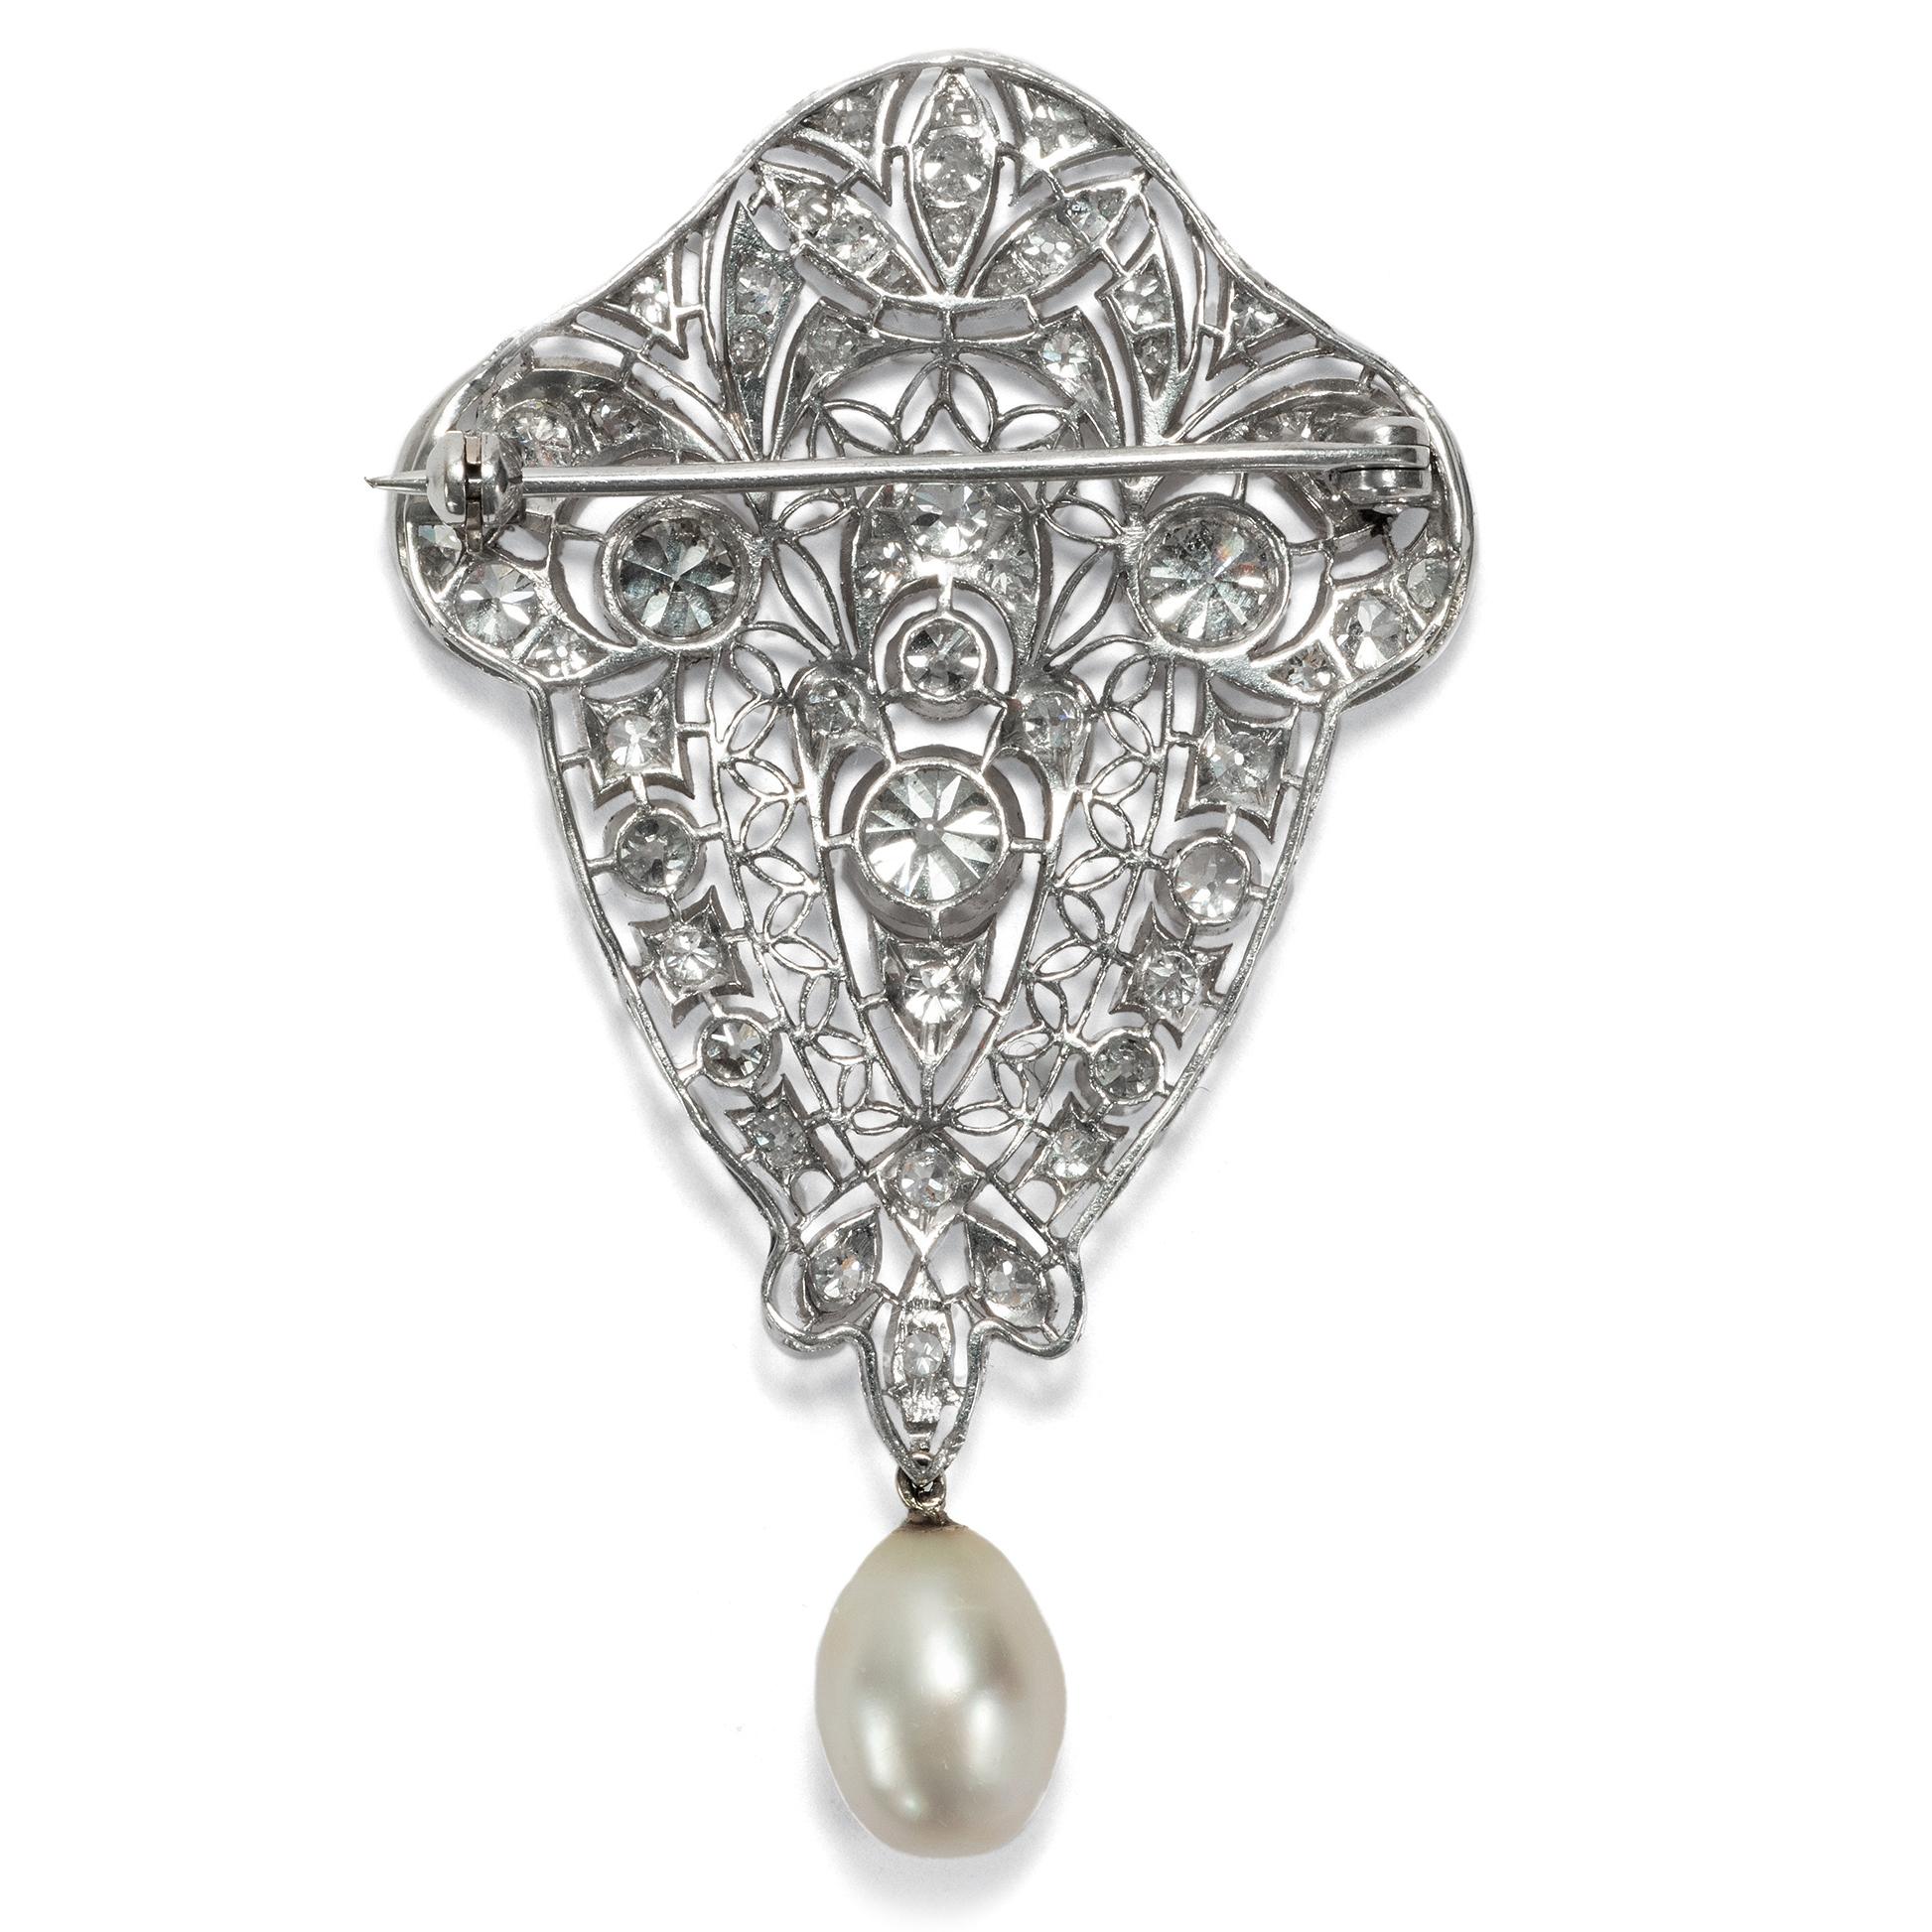 Old European Cut Antique Edwardian circa 1910 Certified 3.55 Carat Diamond Natural Pearl Brooch For Sale